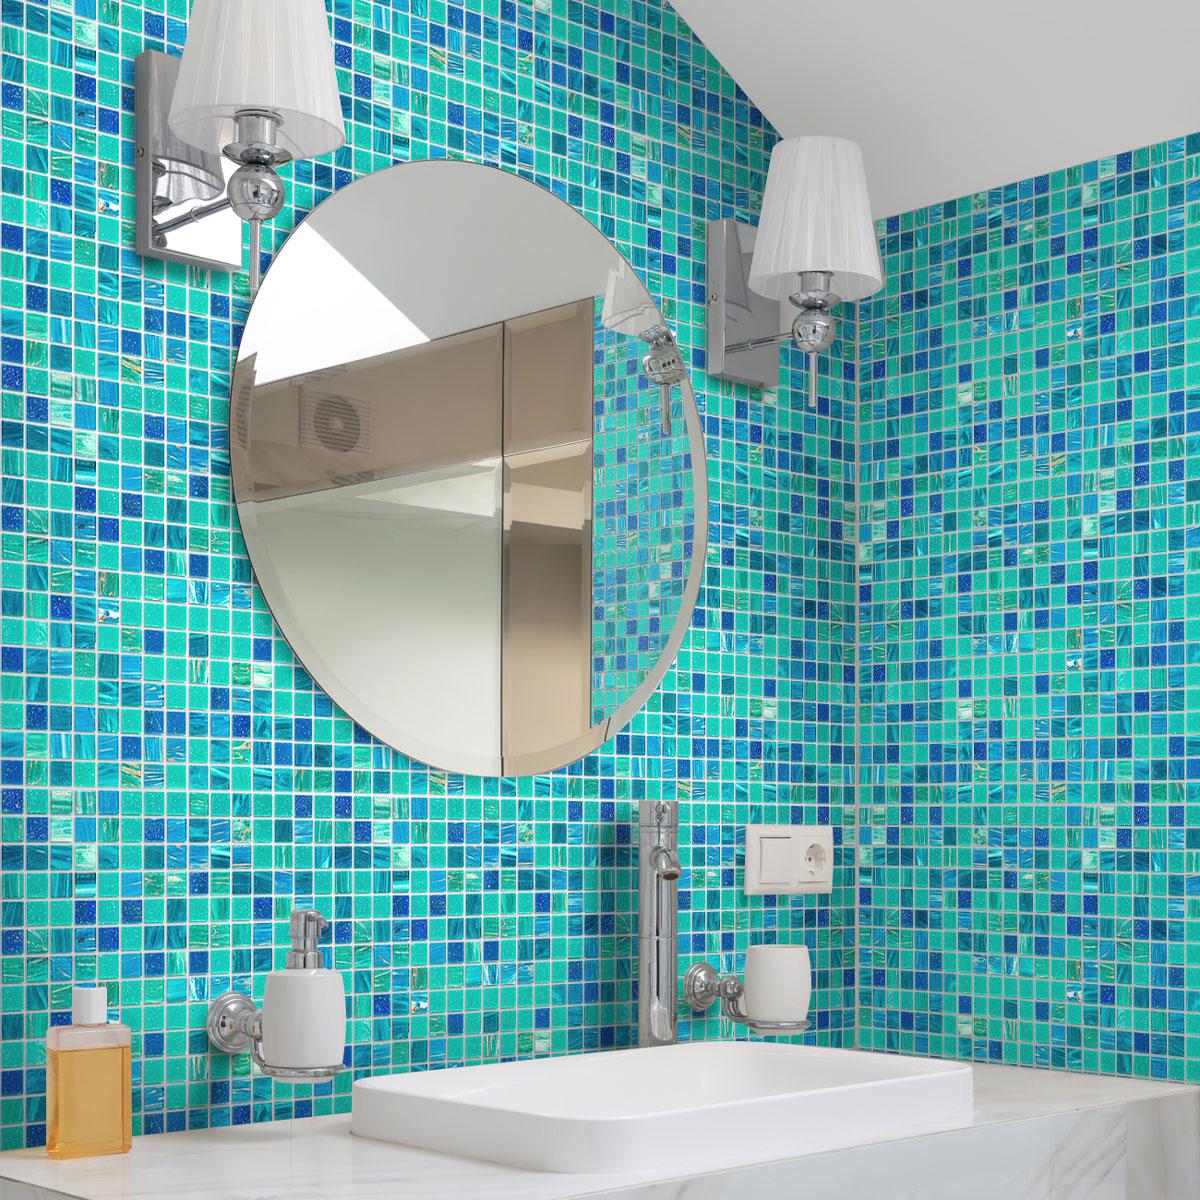 Lagoon Blue Mixed Squares Glass Tile evokes a tranquil bathroom setting